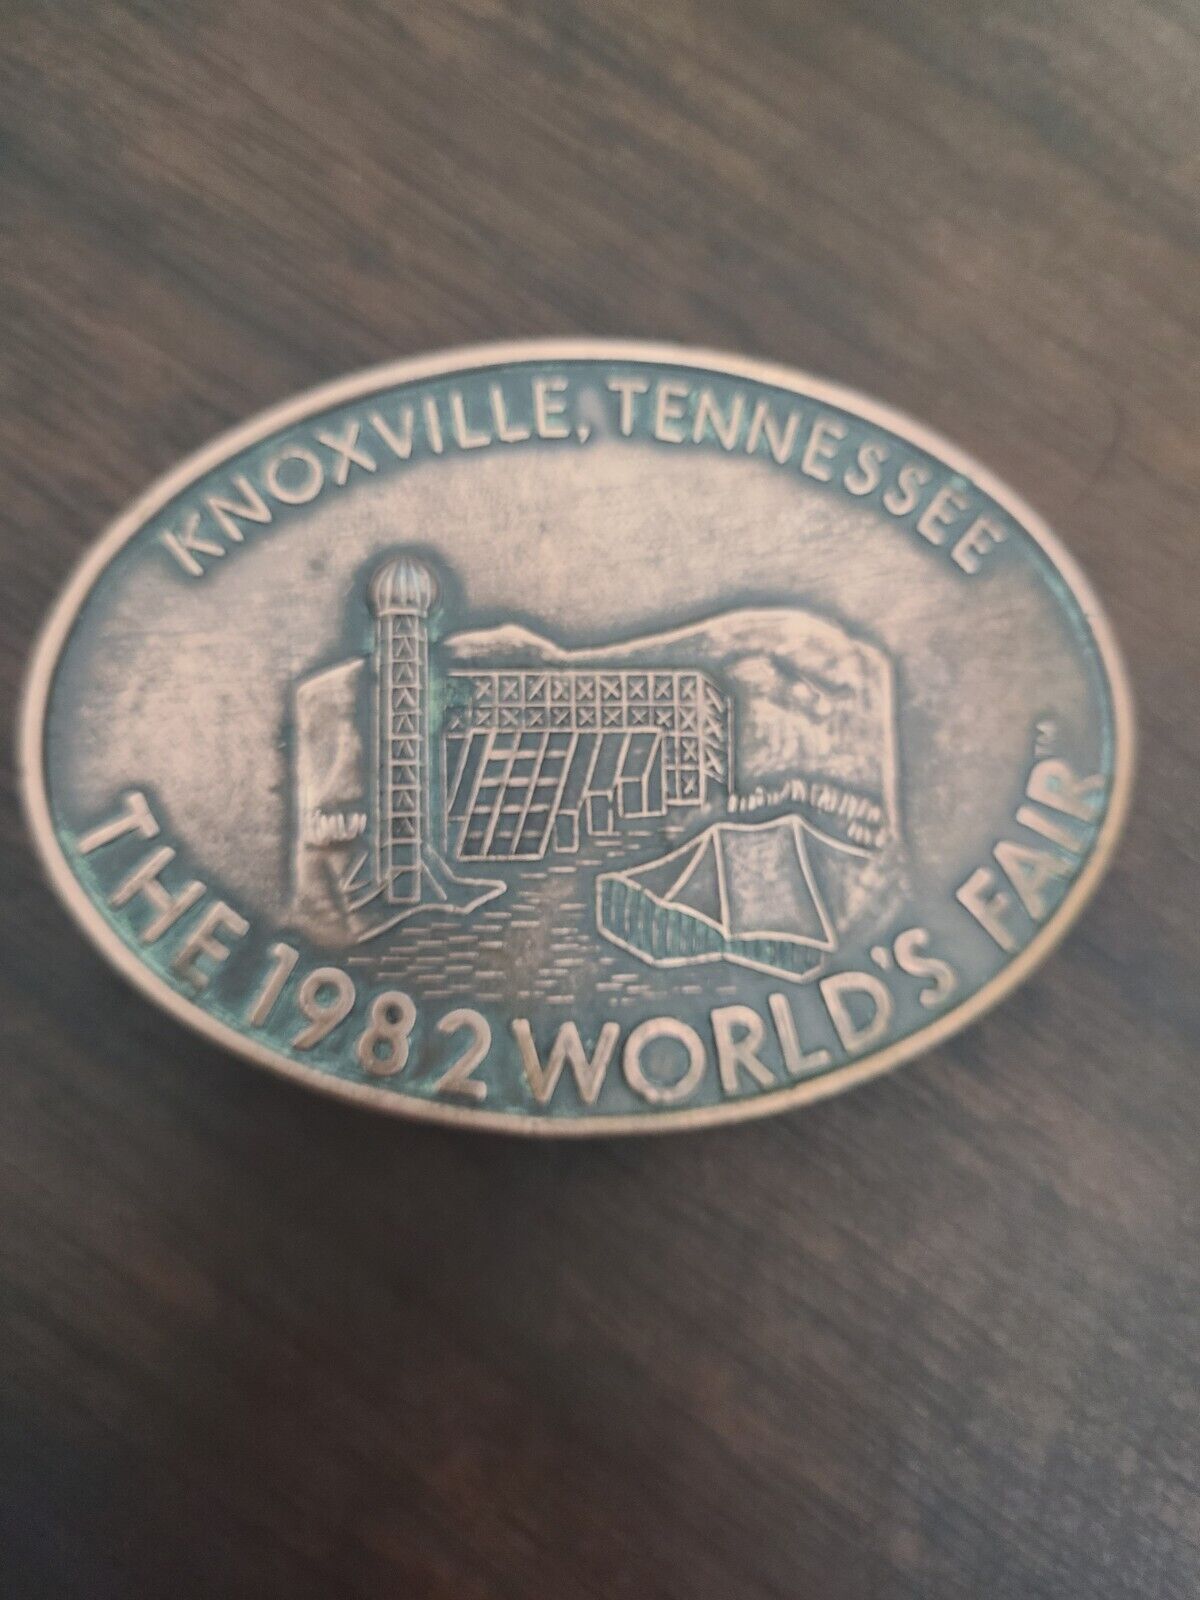 VINTAGE 1982 KNOXVILLE TENNESSEE WORLDS FAIR COPP… - image 1